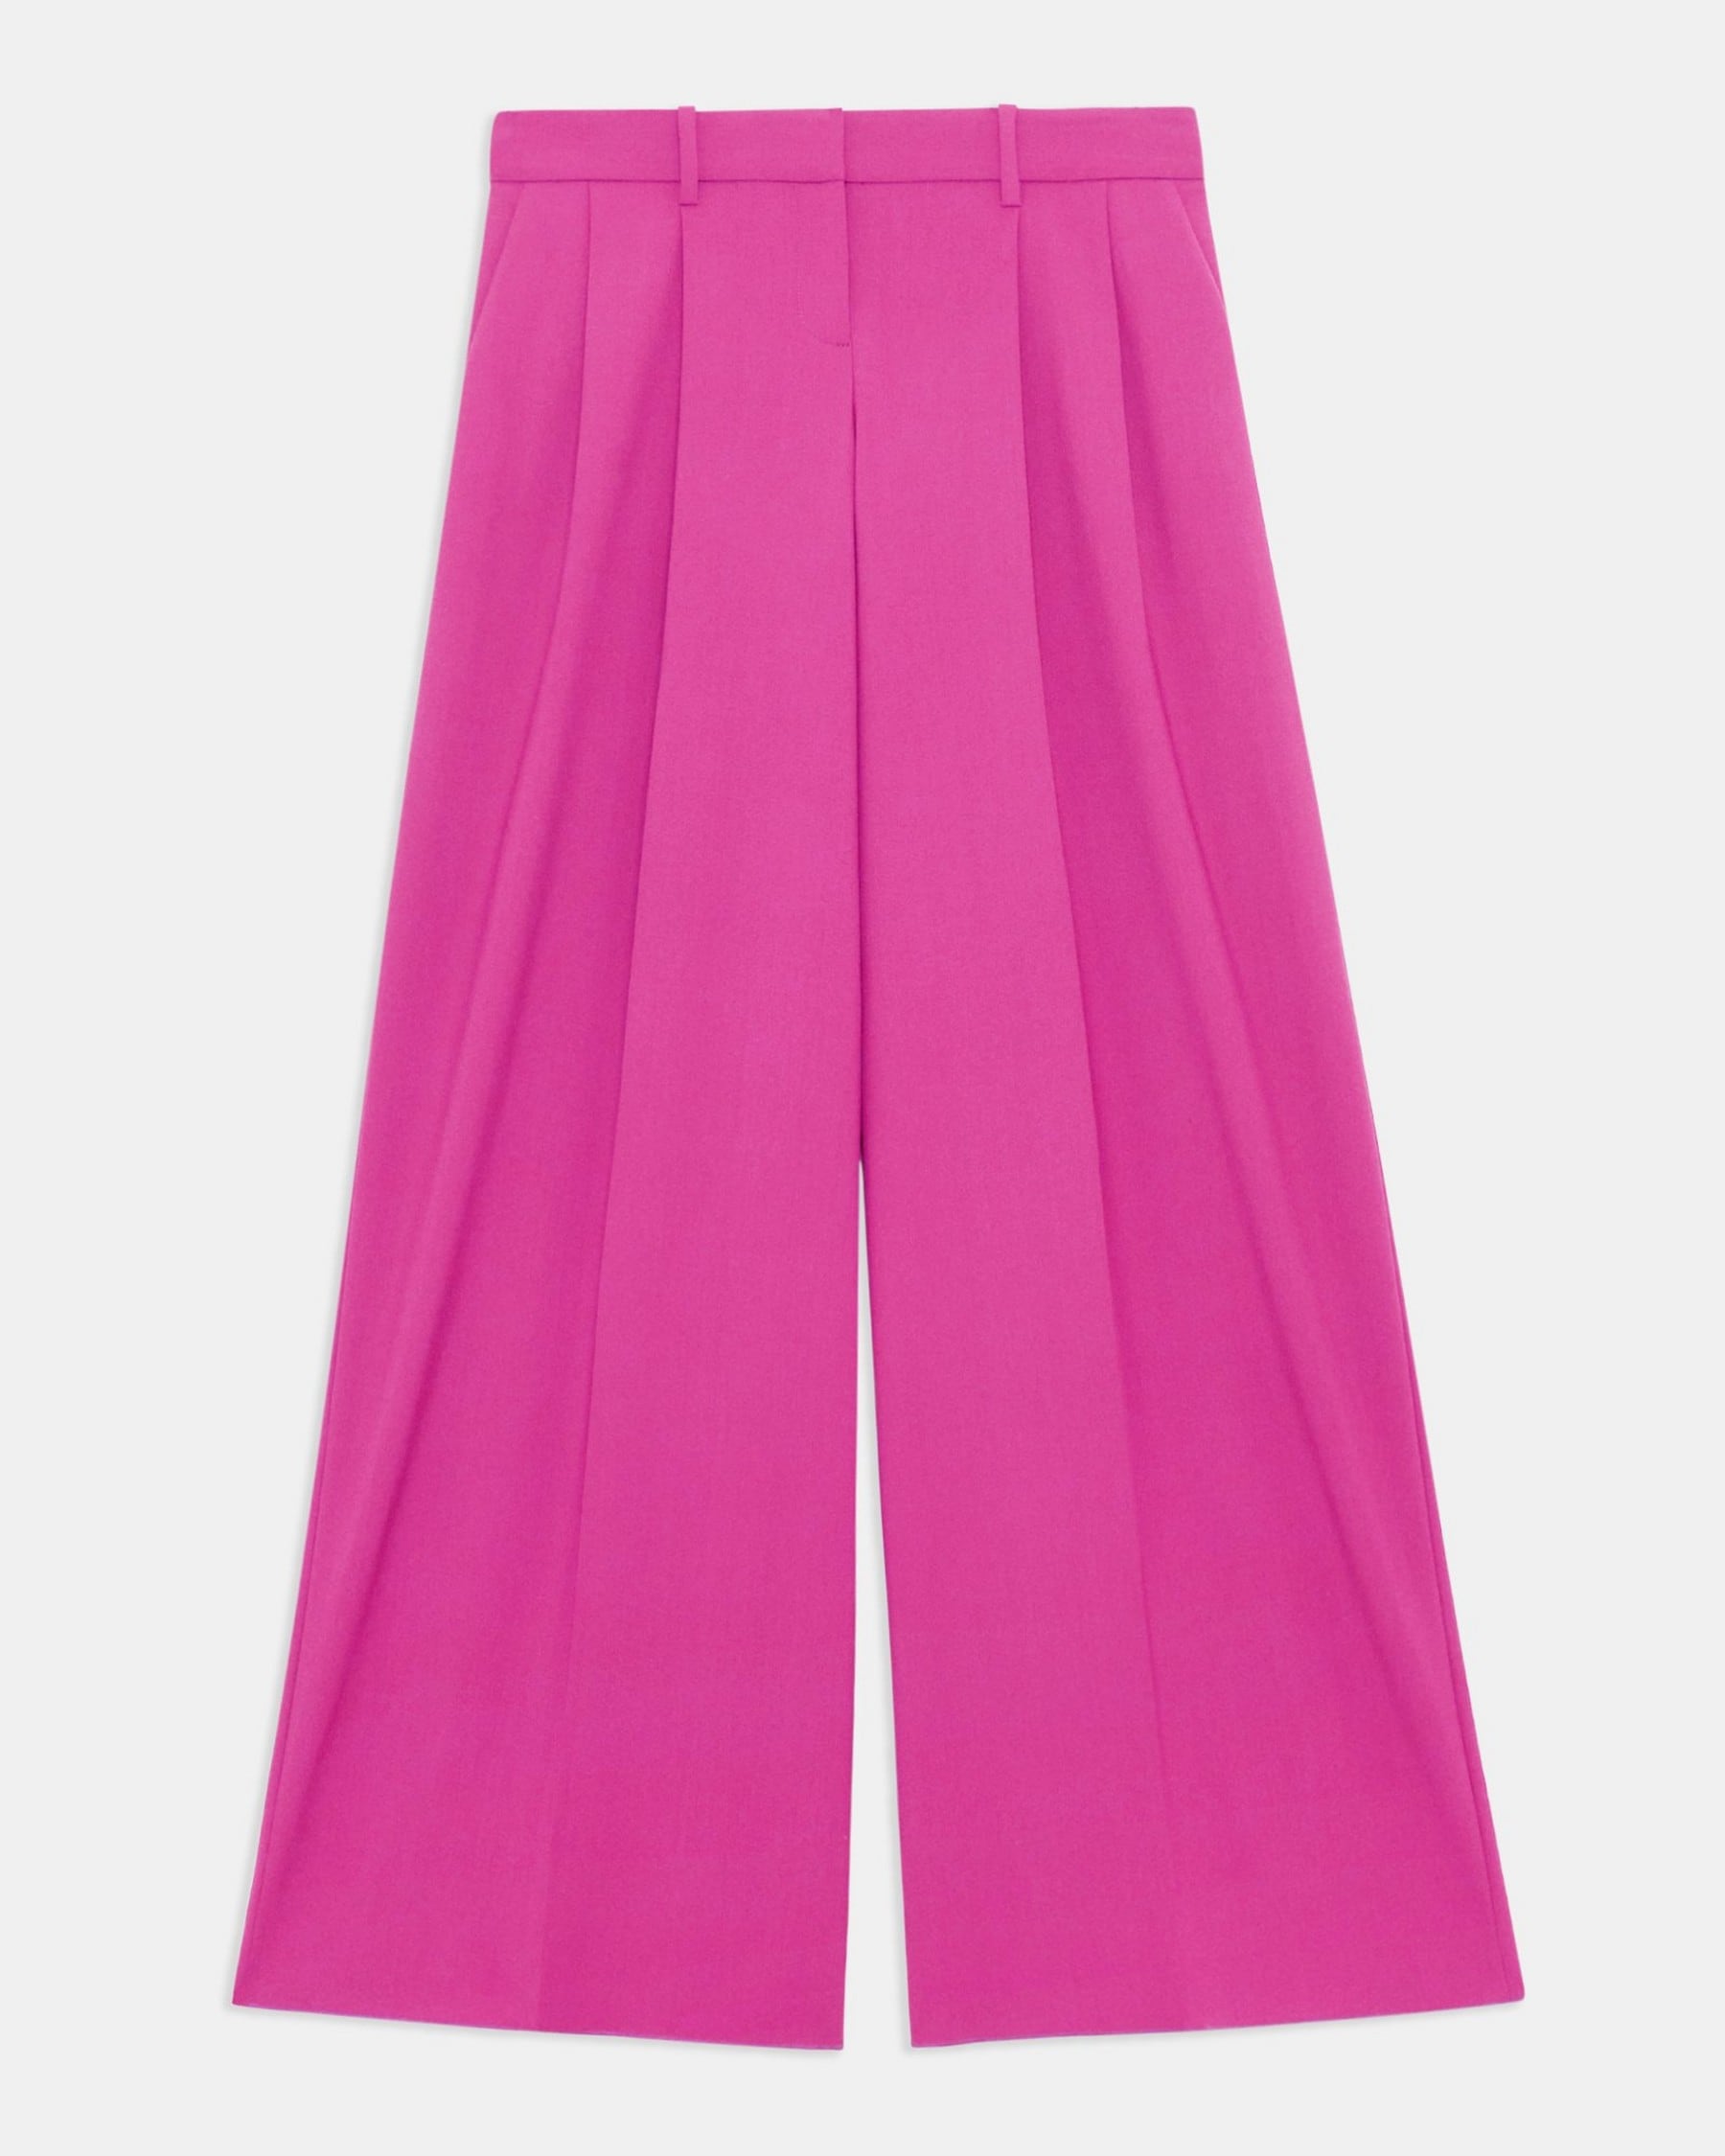 Pleated Low-Rise Pant in Stretch Wool